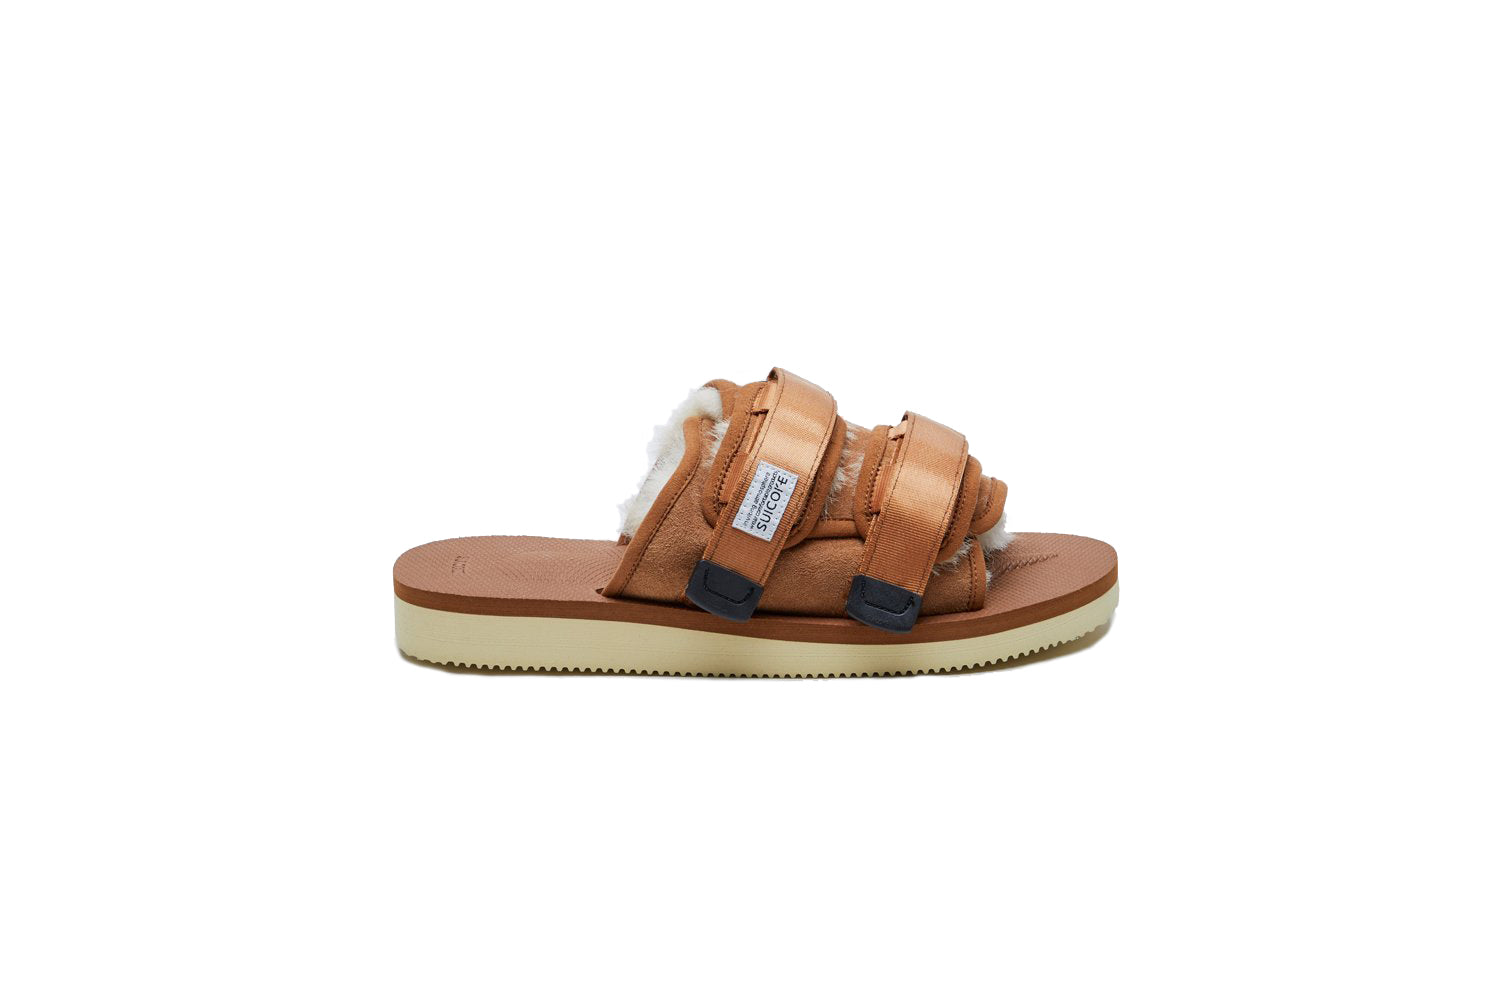 Moto M2AB BROWN
NAME: MOTO-M2abCOLOR: BrownMATERIAL: UPPER SHELL / MoutonFOOTBED / SUICOKE EVA AntibacterialSOLE / SUICOKE Original Sole SUICOKE